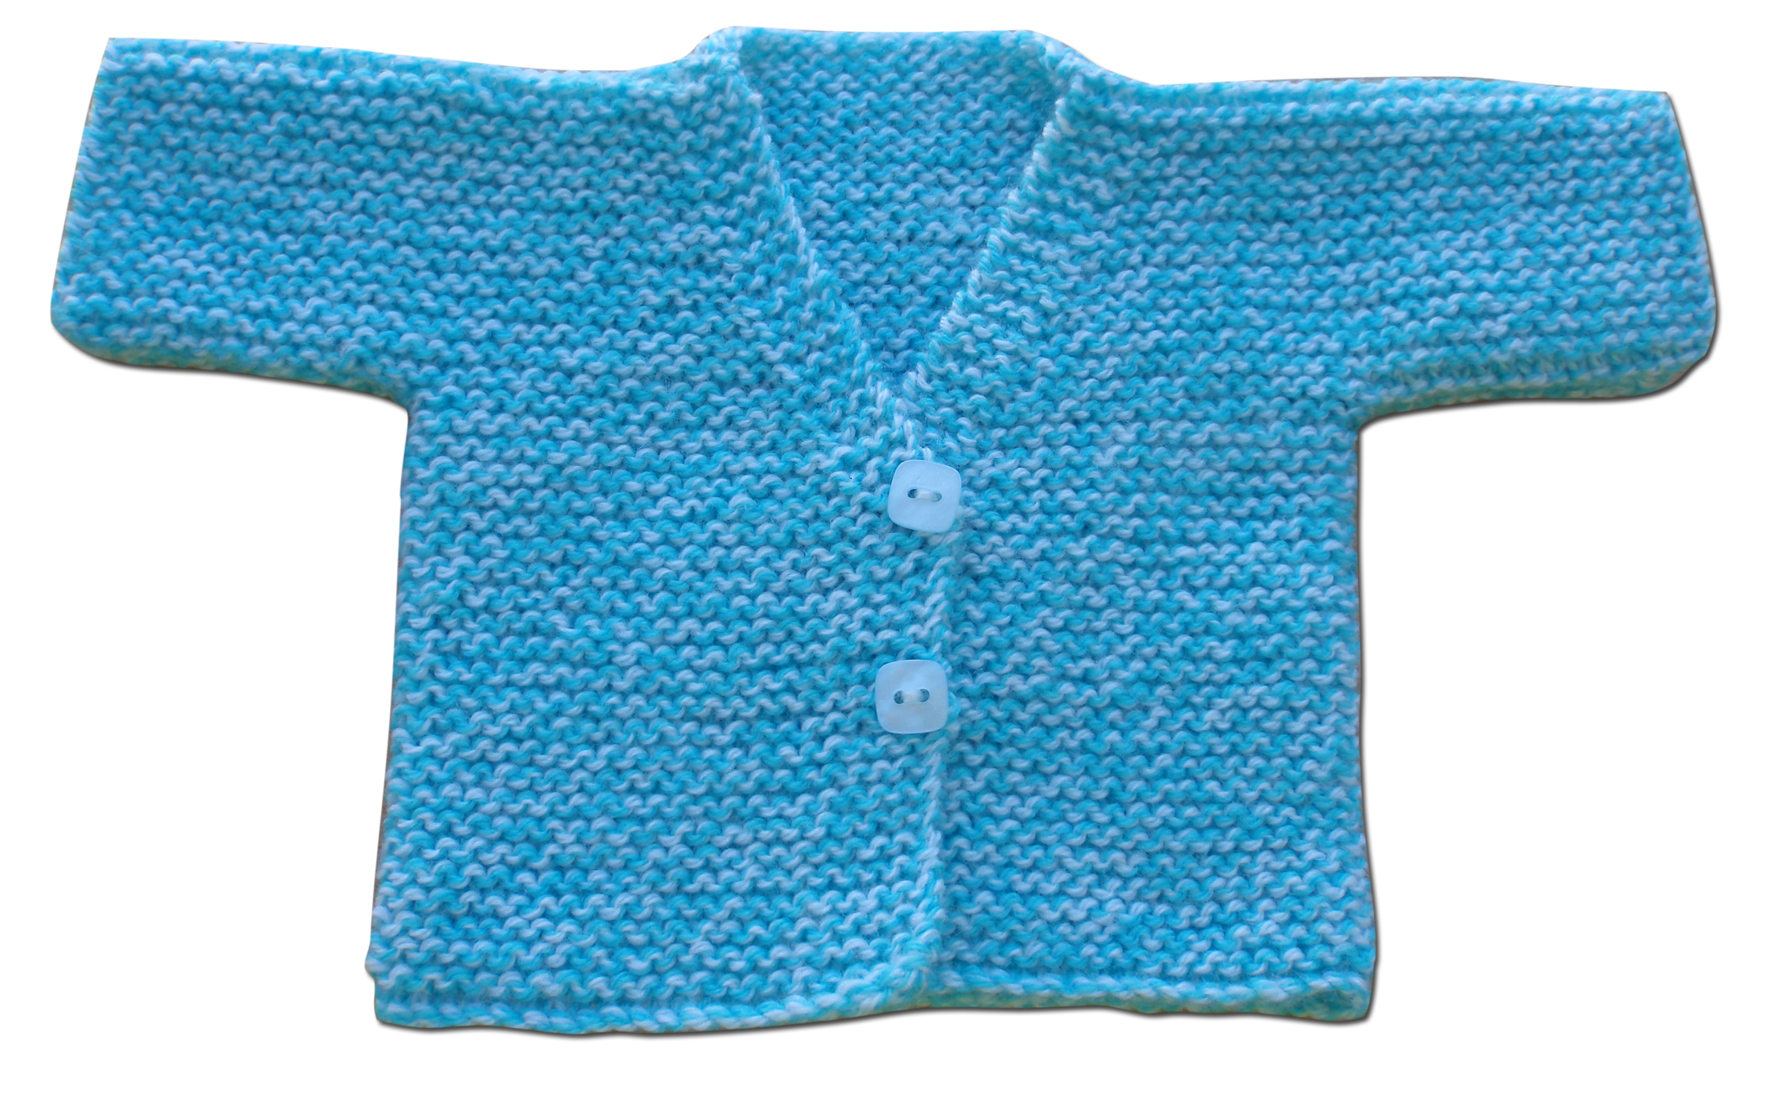 Premature Baby Knitting Patterns Help Our Babies